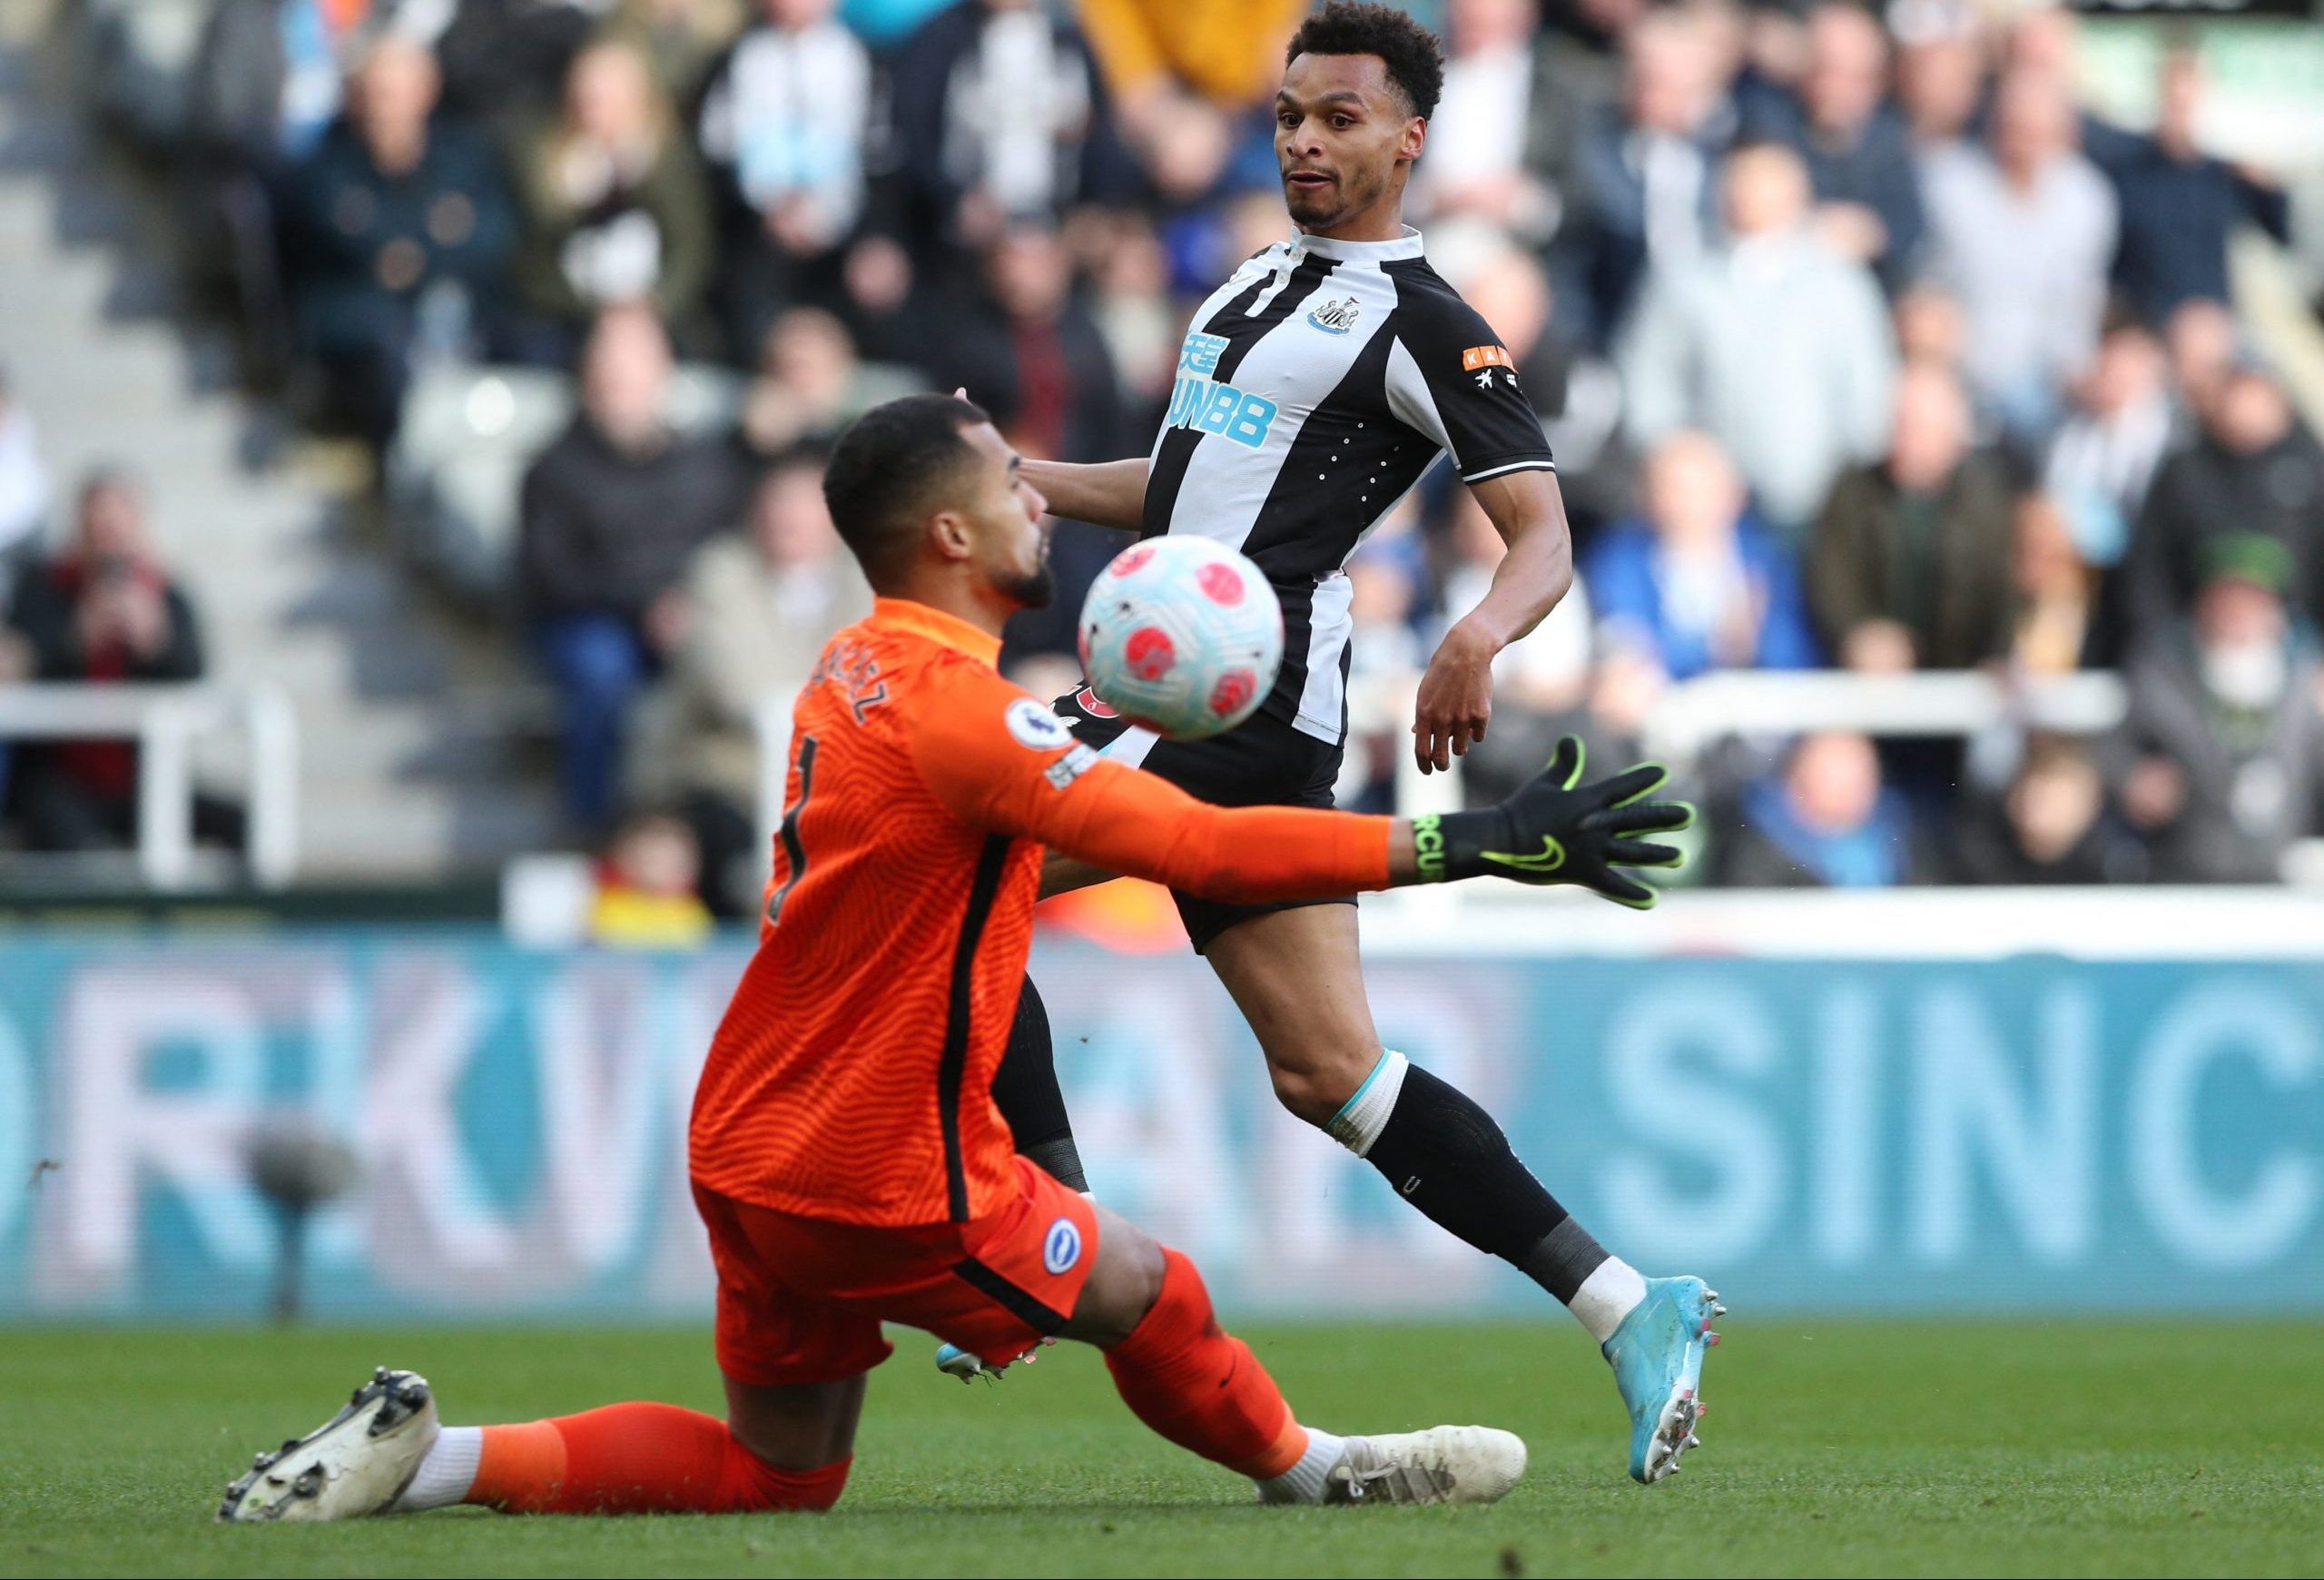 Soccer Football - Premier League - Newcastle United v Brighton &amp; Hove Albion - St James' Park, Newcastle, Britain - March 5, 2022 Brighton &amp; Hove Albion's Robert Sanchez saves a shot from Newcastle United's Jacob Murphy REUTERS/Scott Heppell EDITORIAL USE ONLY. No use with unauthorized audio, video, data, fixture lists, club/league logos or 'live' services. Online in-match use limited to 75 images, no video emulation. No use in betting, games or single club /league/player publications.  